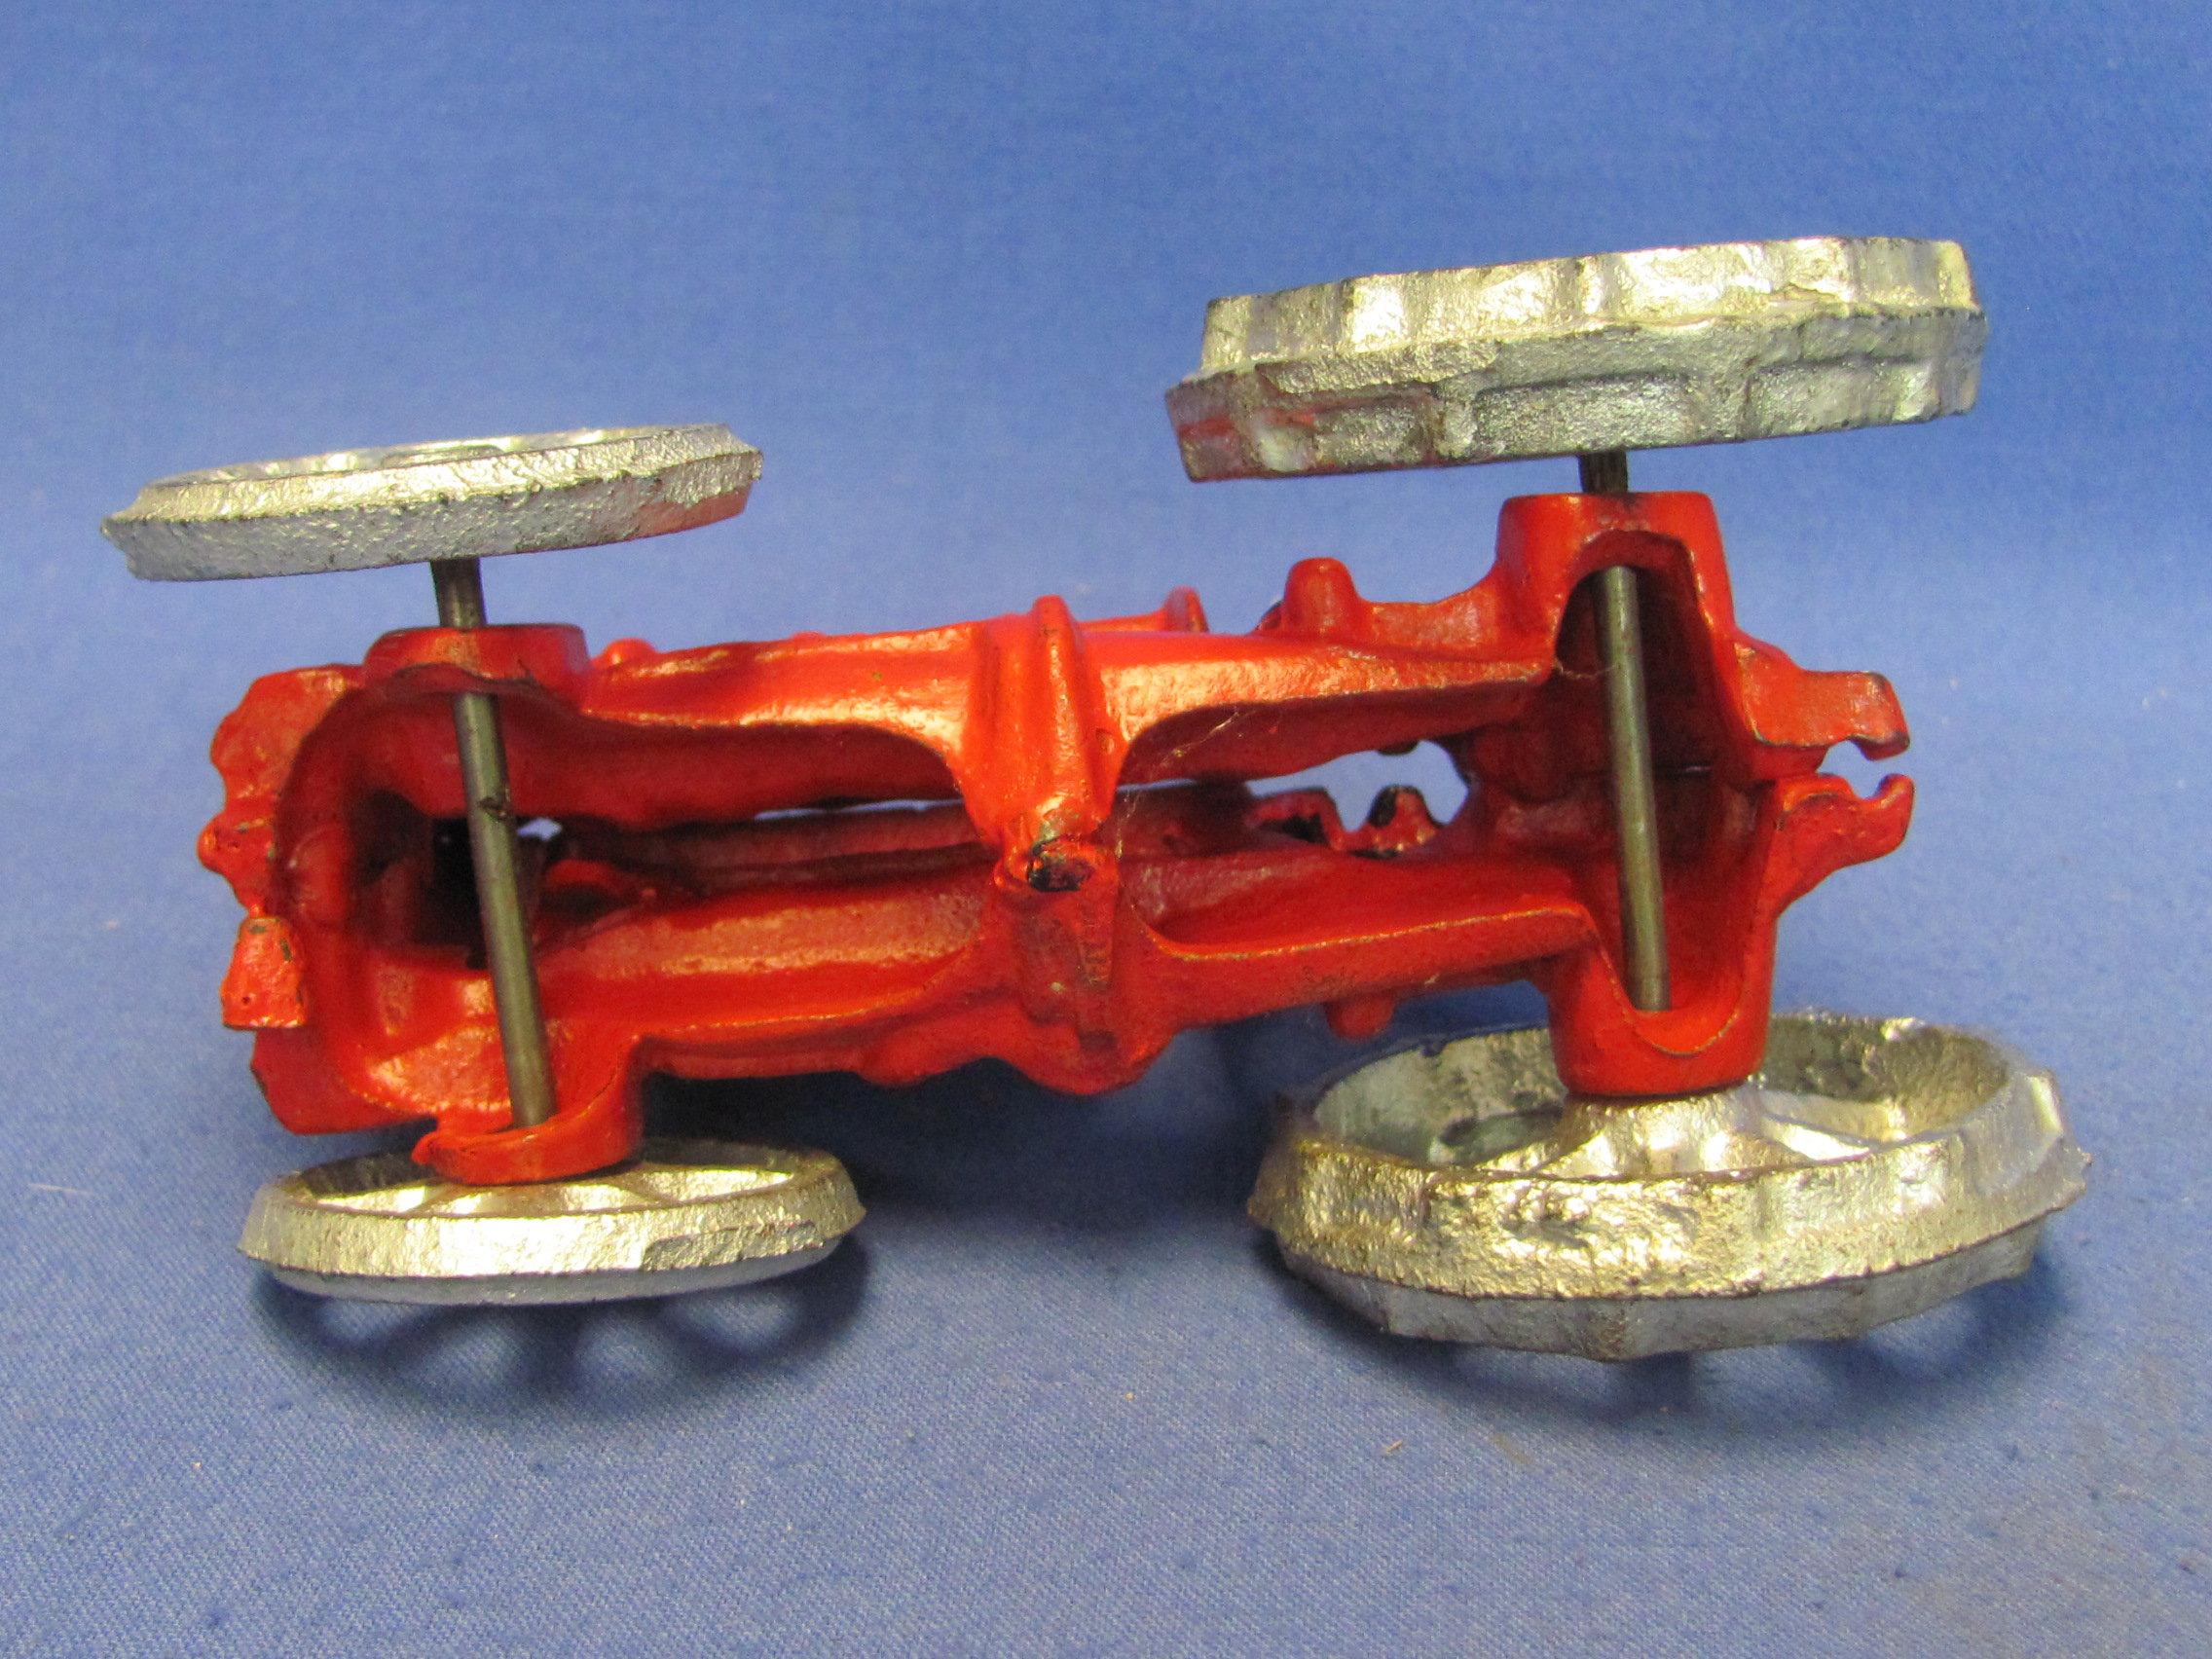 Painted Cast Iron Model of Farmer Driving Tractor – 5 1/4” long – Newer – Good condition, as shown